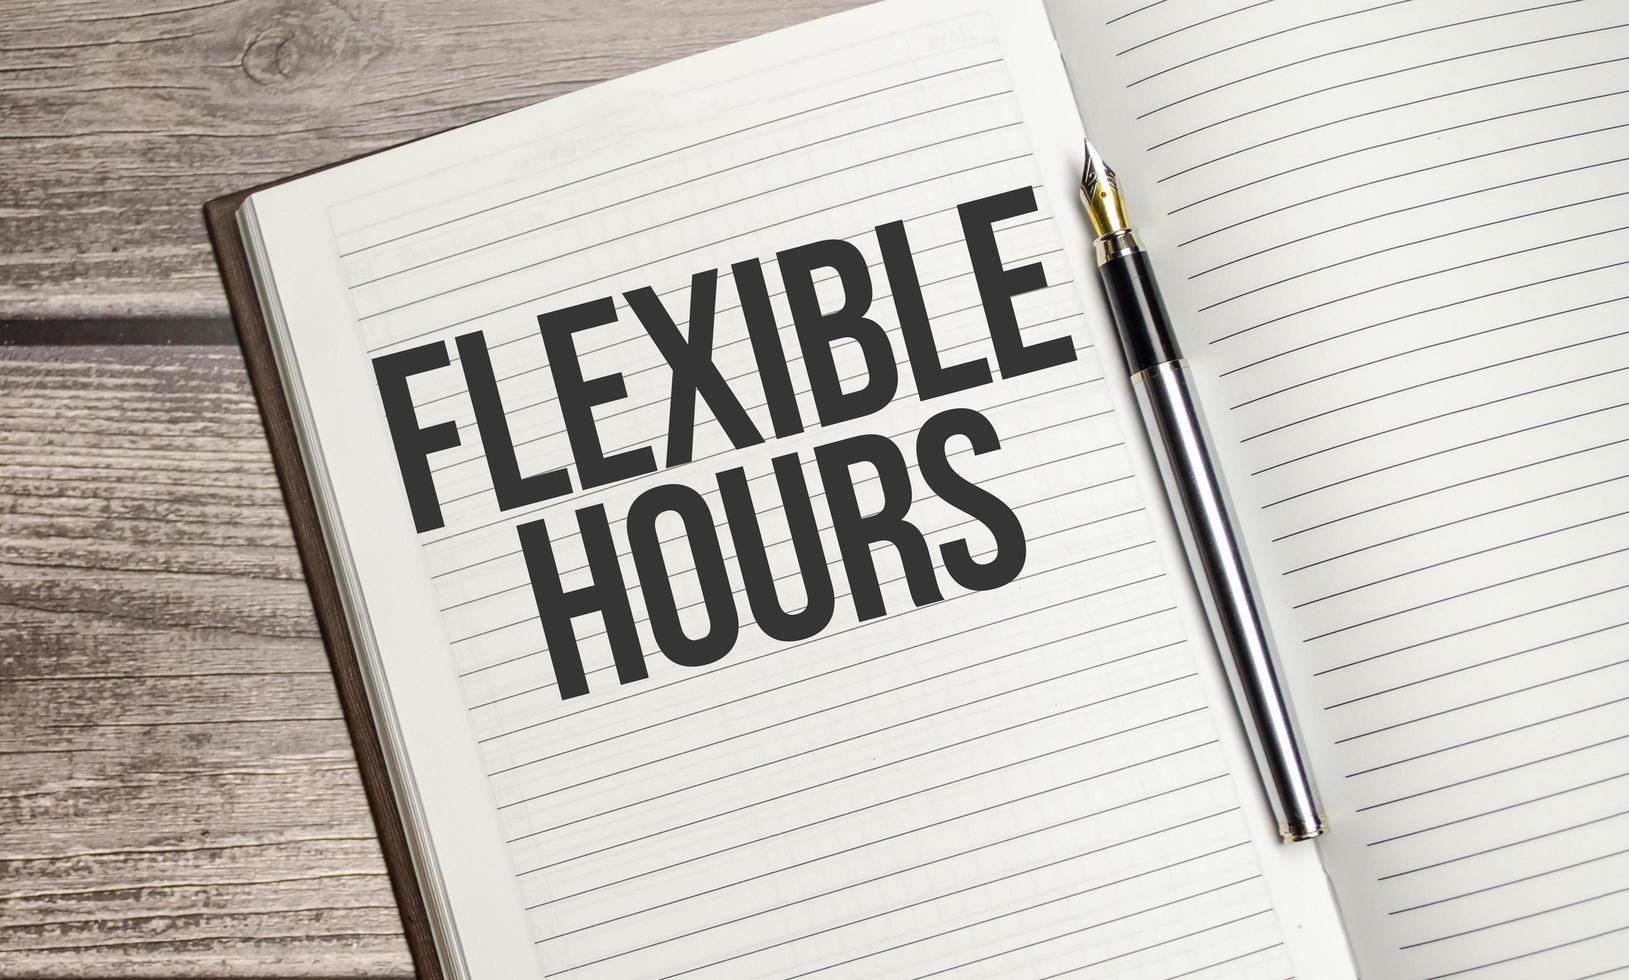 FLEXIBLE HOURS text on a notepad with pen, business photo